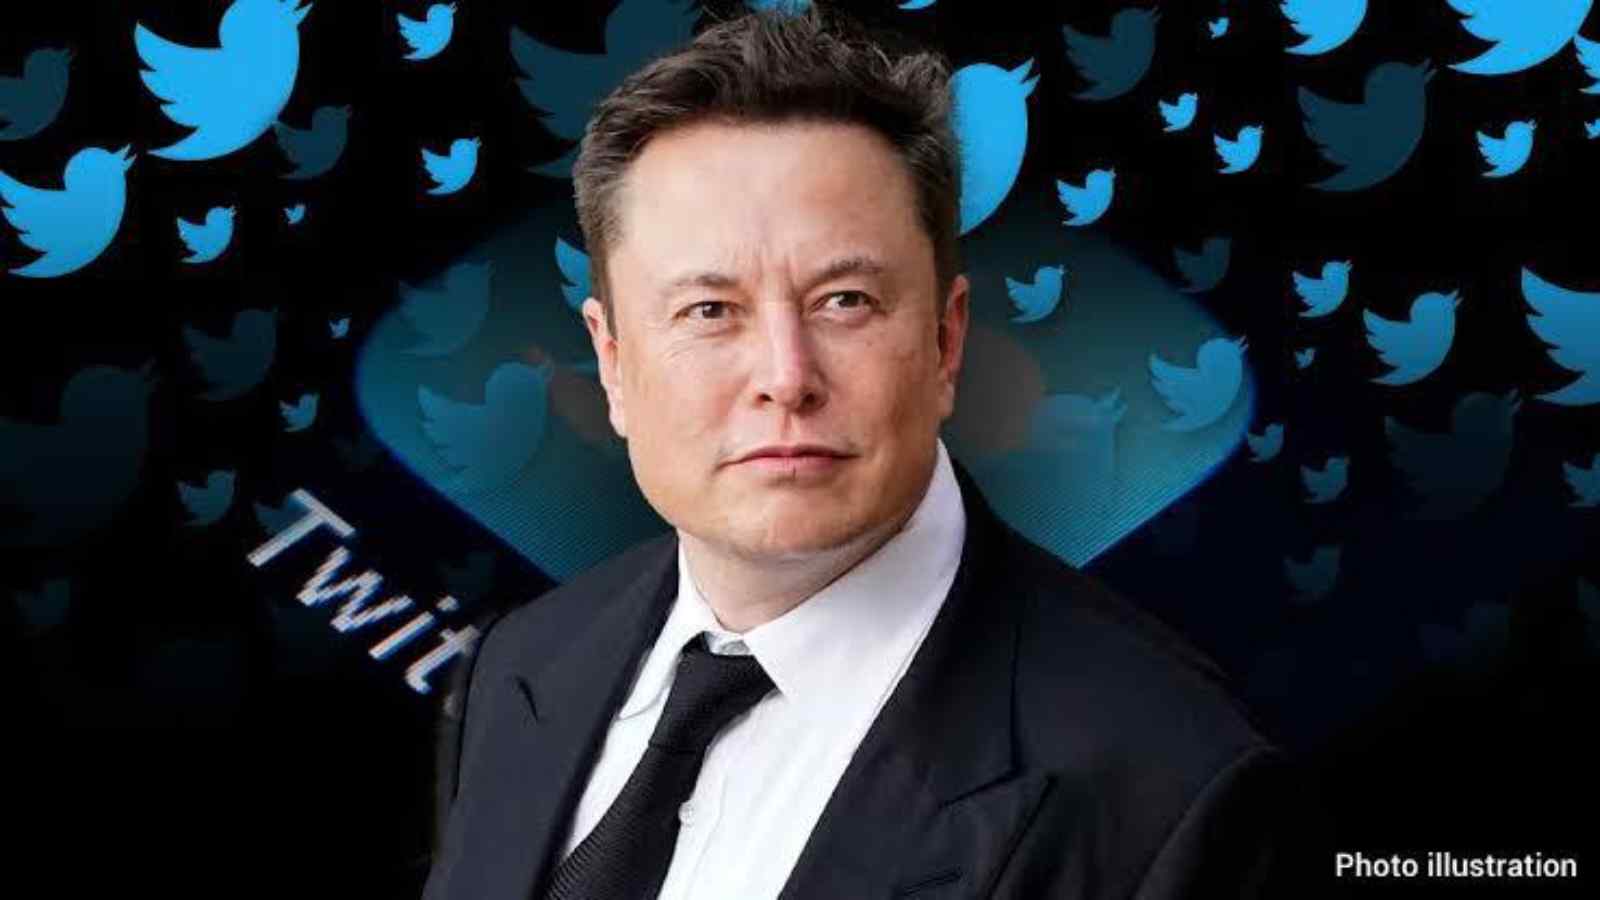 How is Twitter going to look with the new owner as Elon Musk?